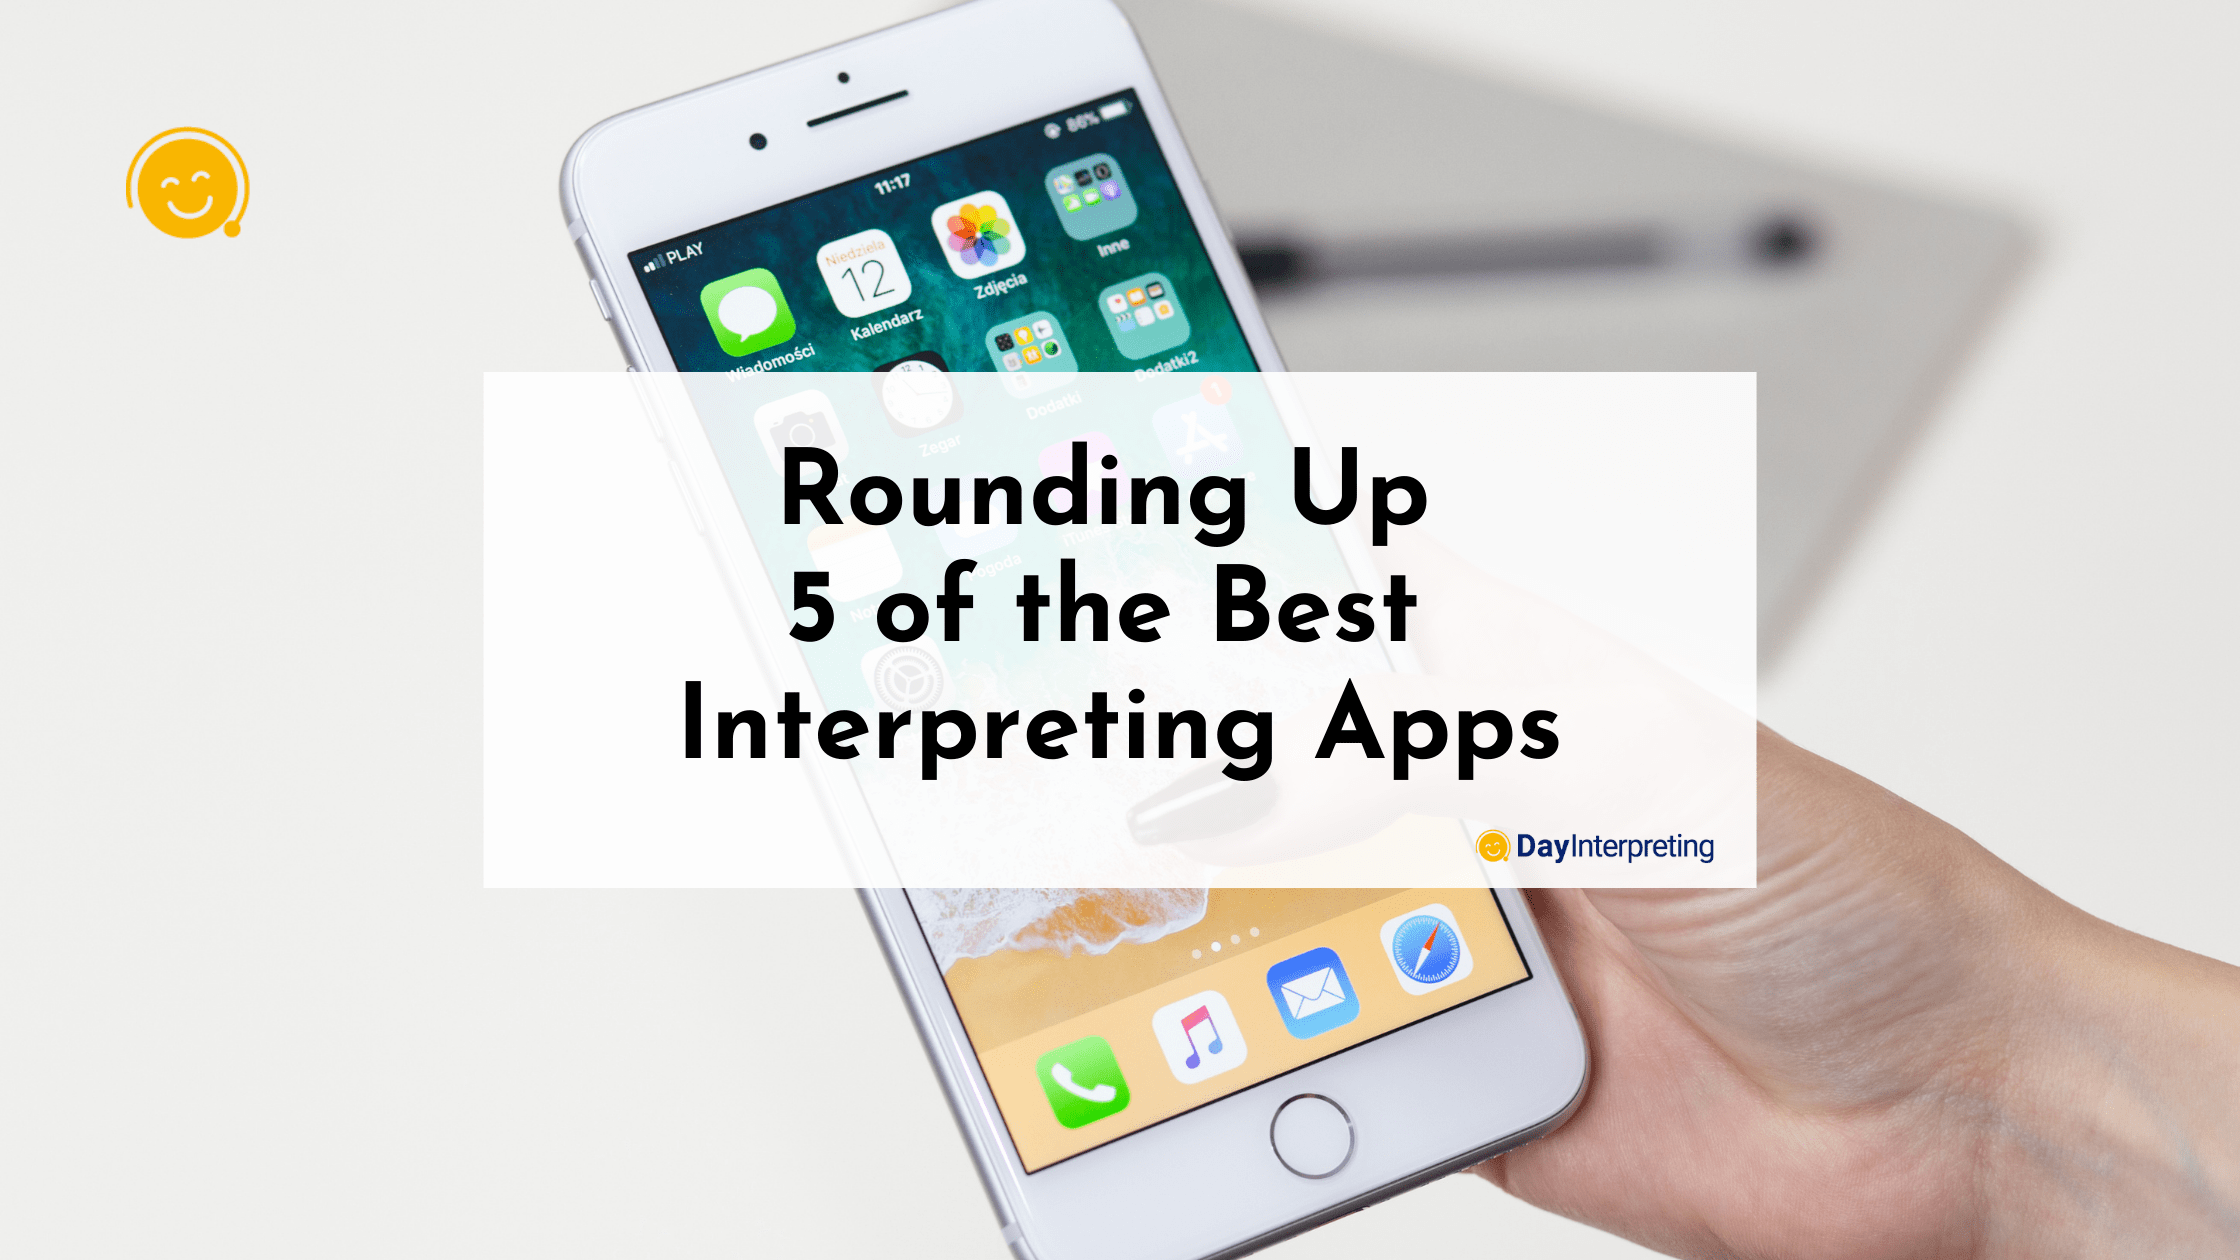 Rounding Up 5 of the Best Interpreting Apps